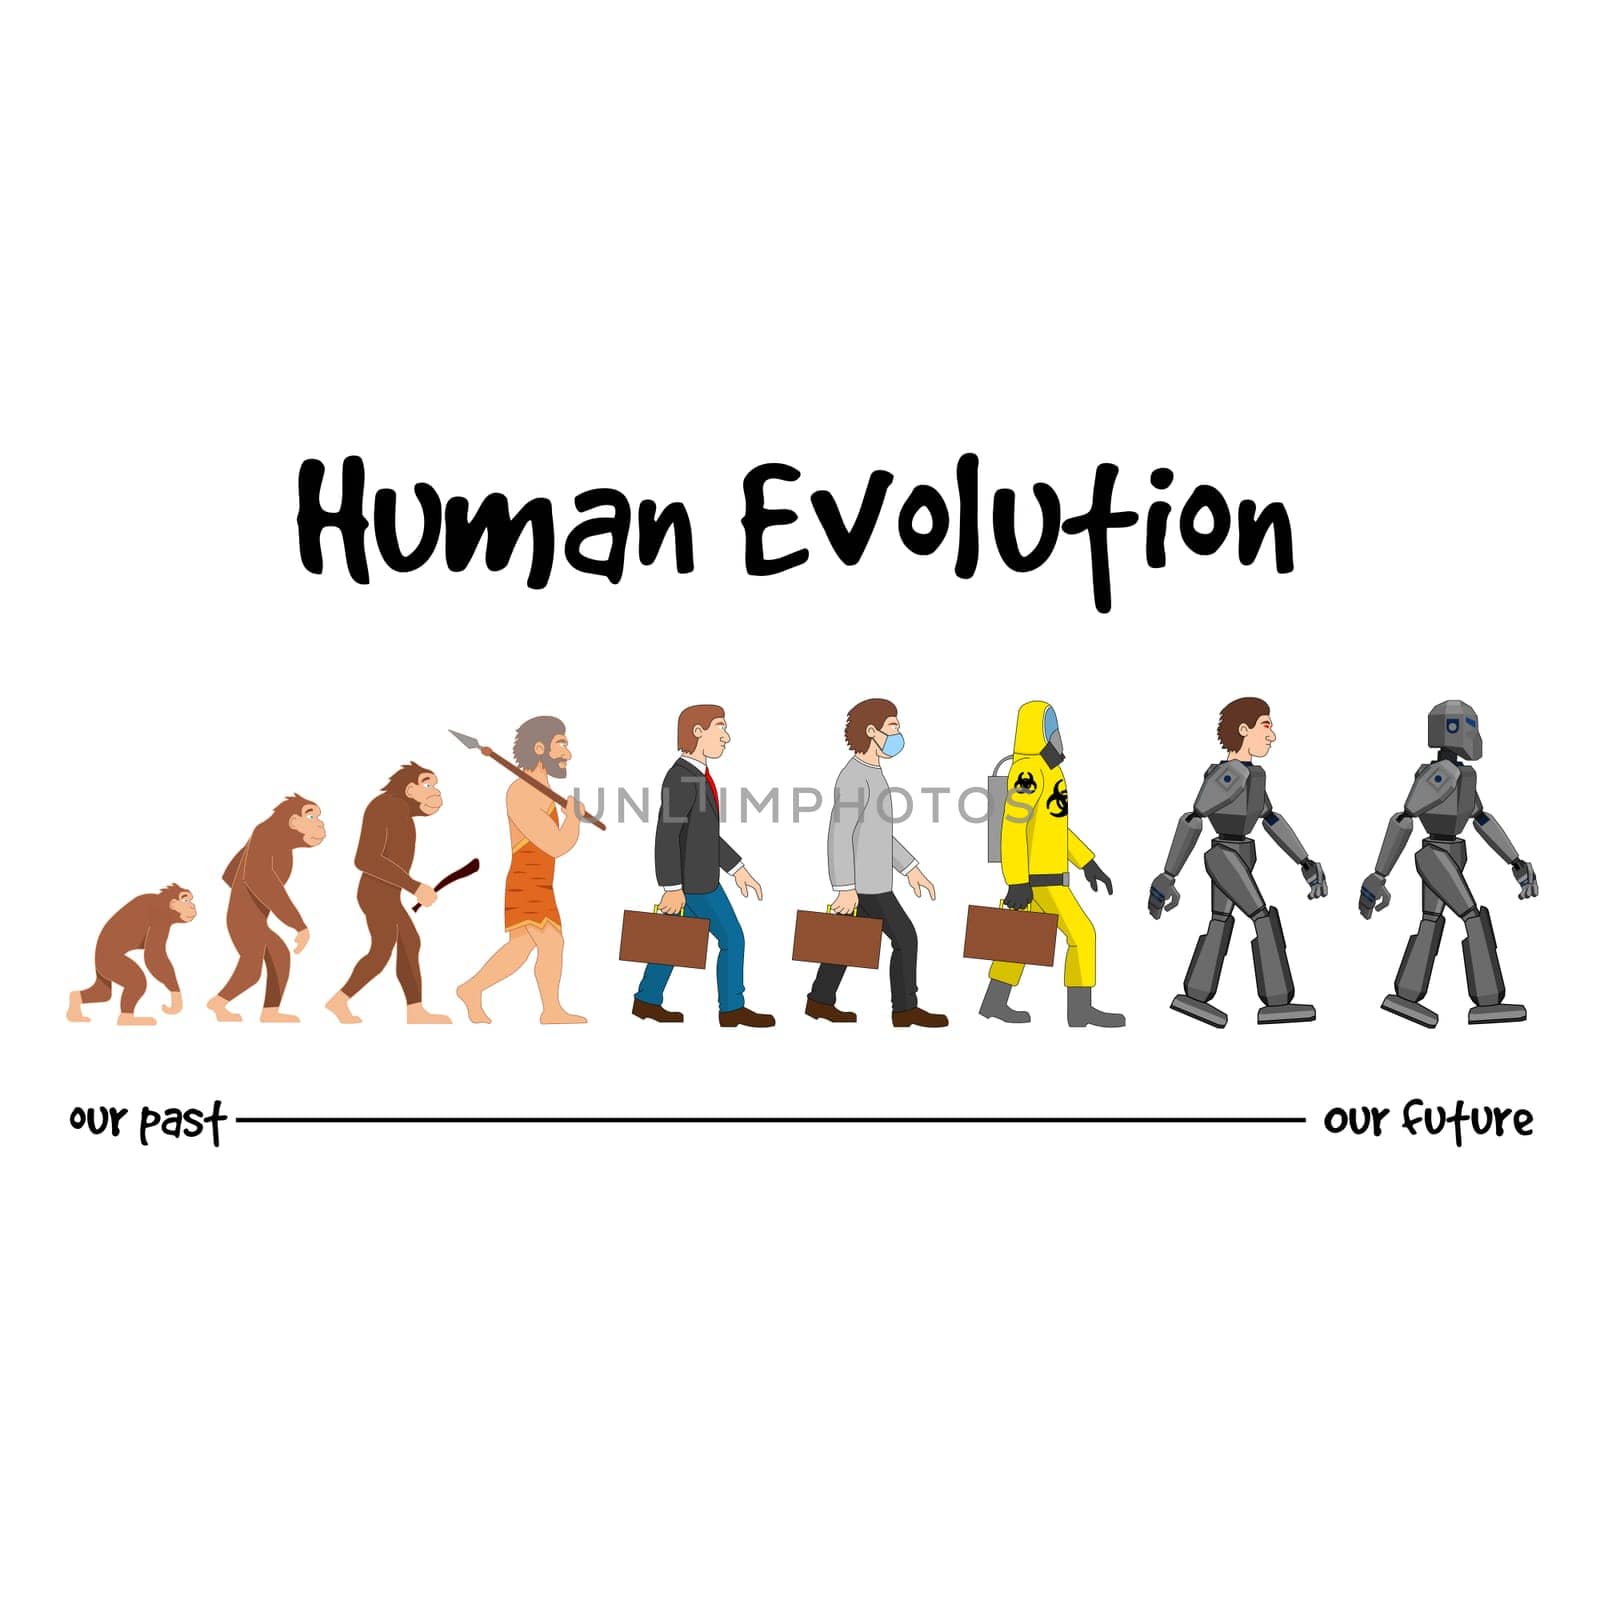 A funny human evolution timeline from times of monkey to future of robot men with the text "Human Evolution".above.